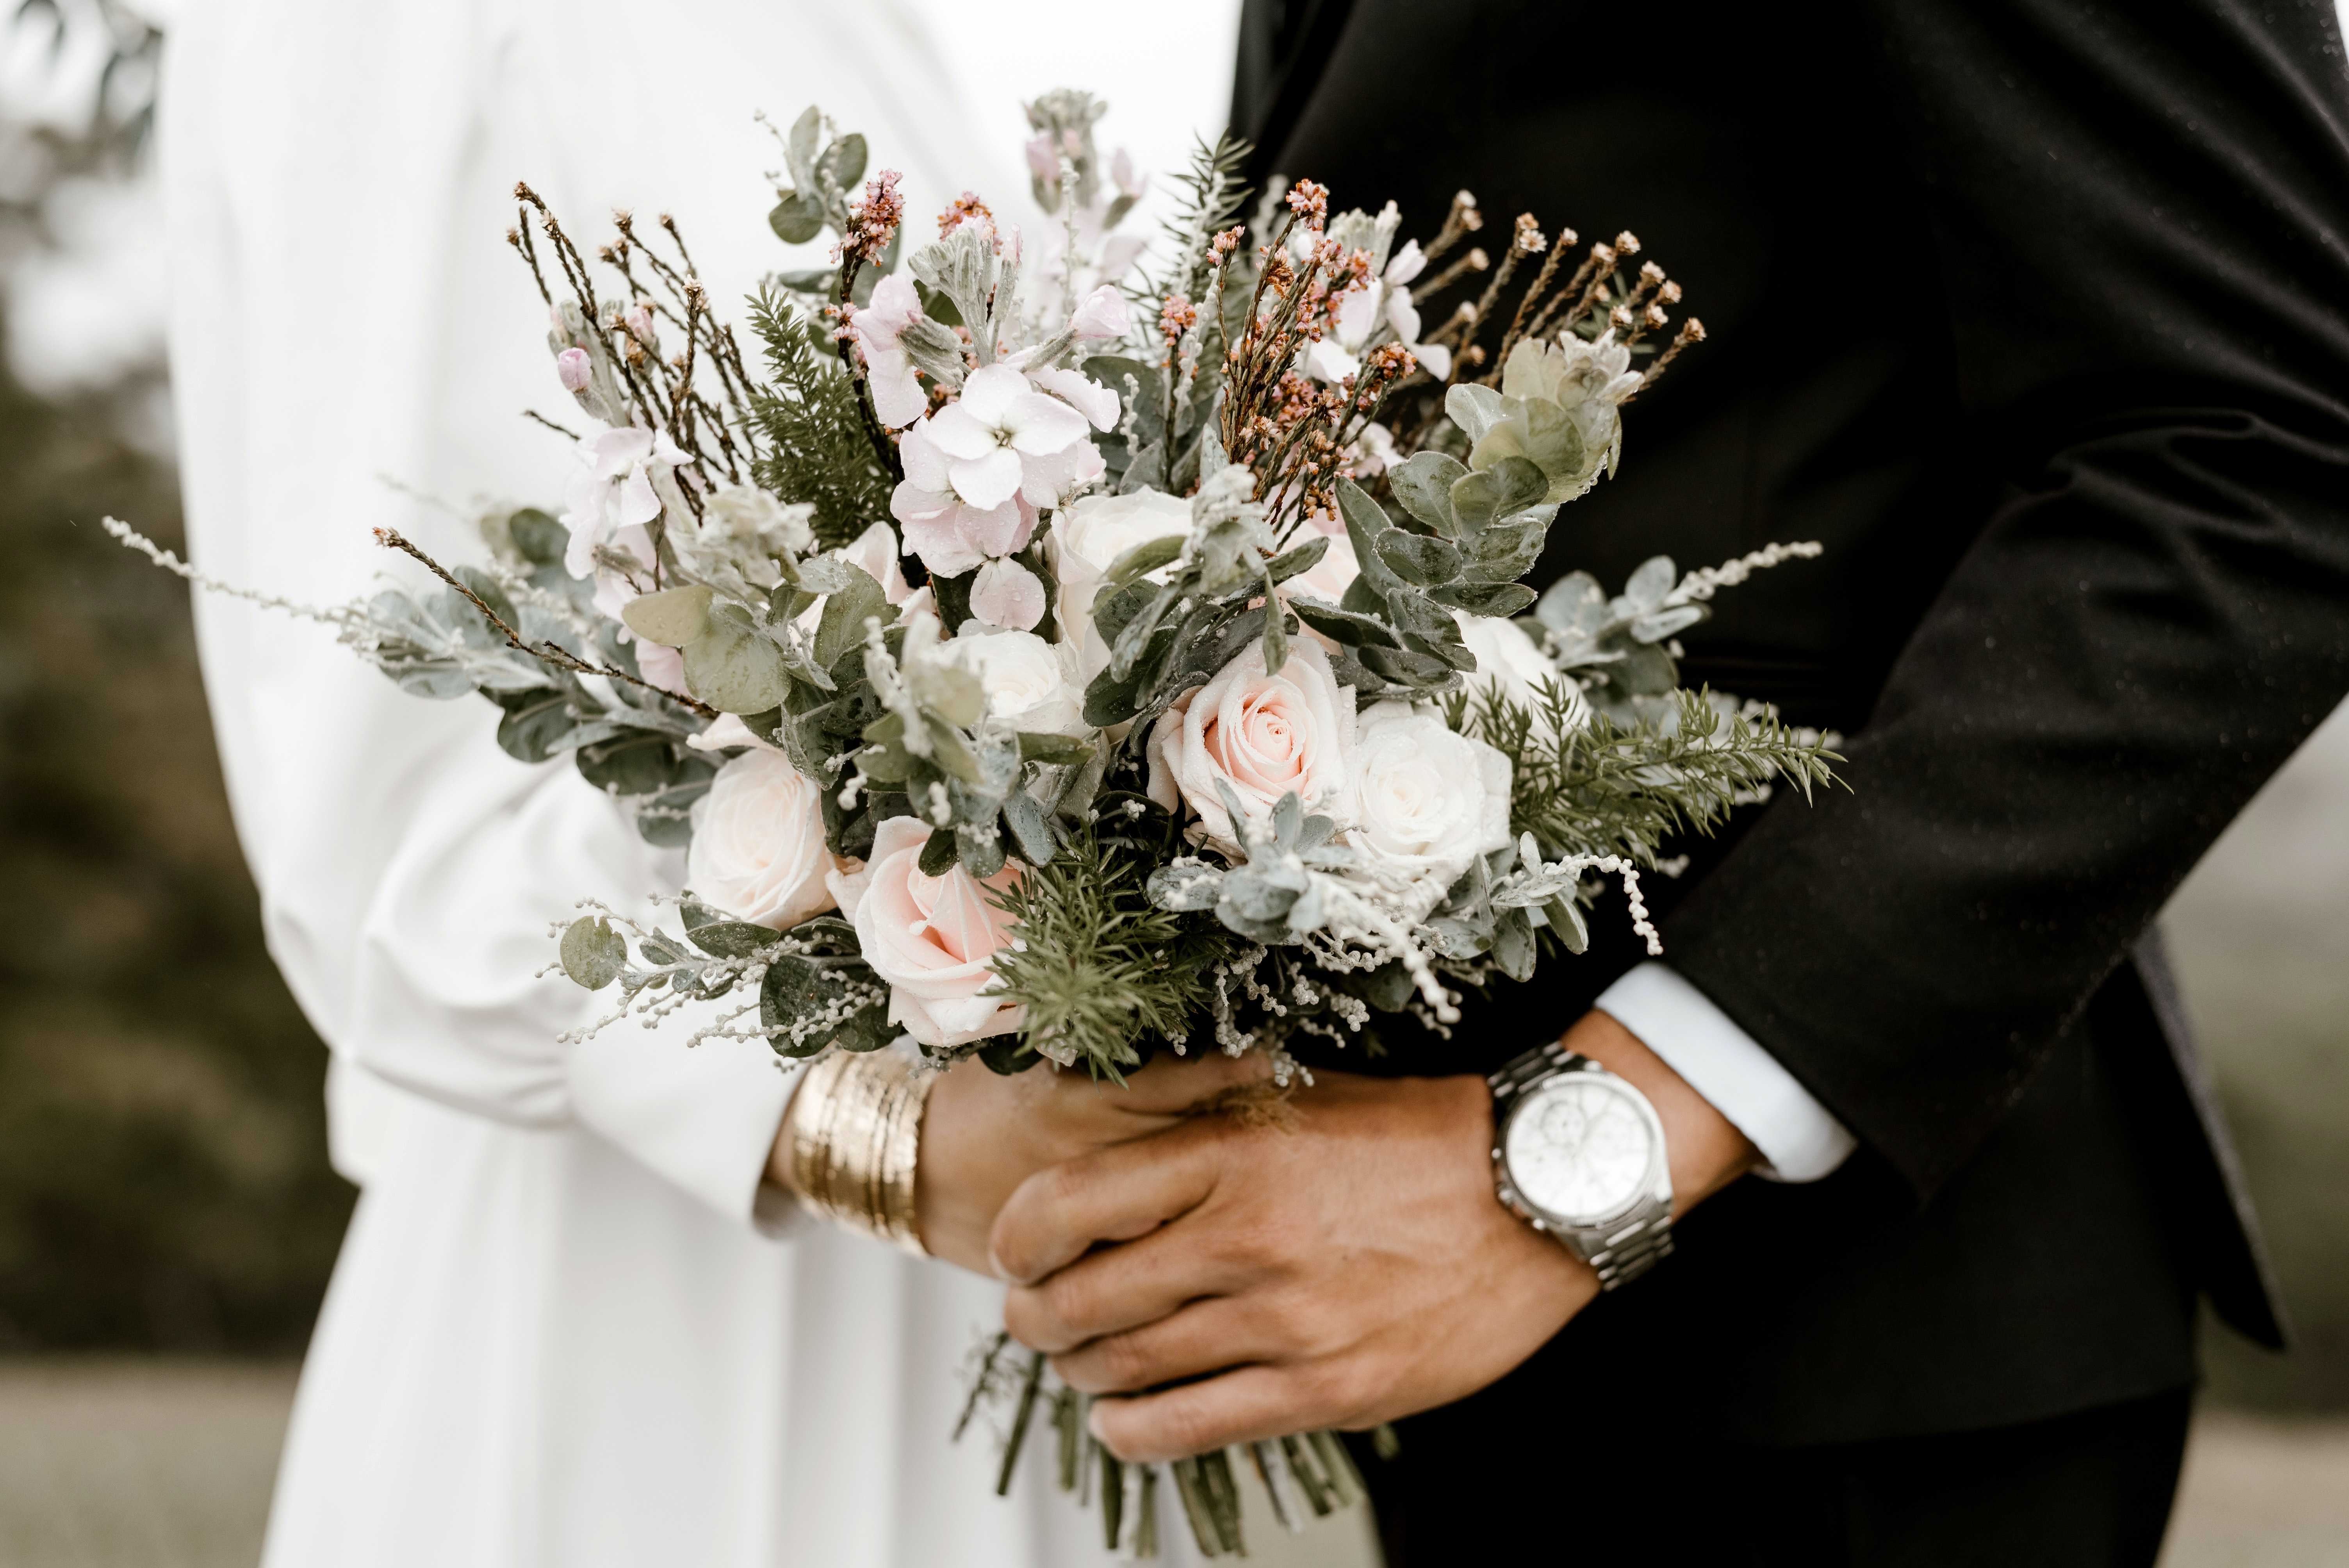 Husband holding hand of wife who is holding a boquet